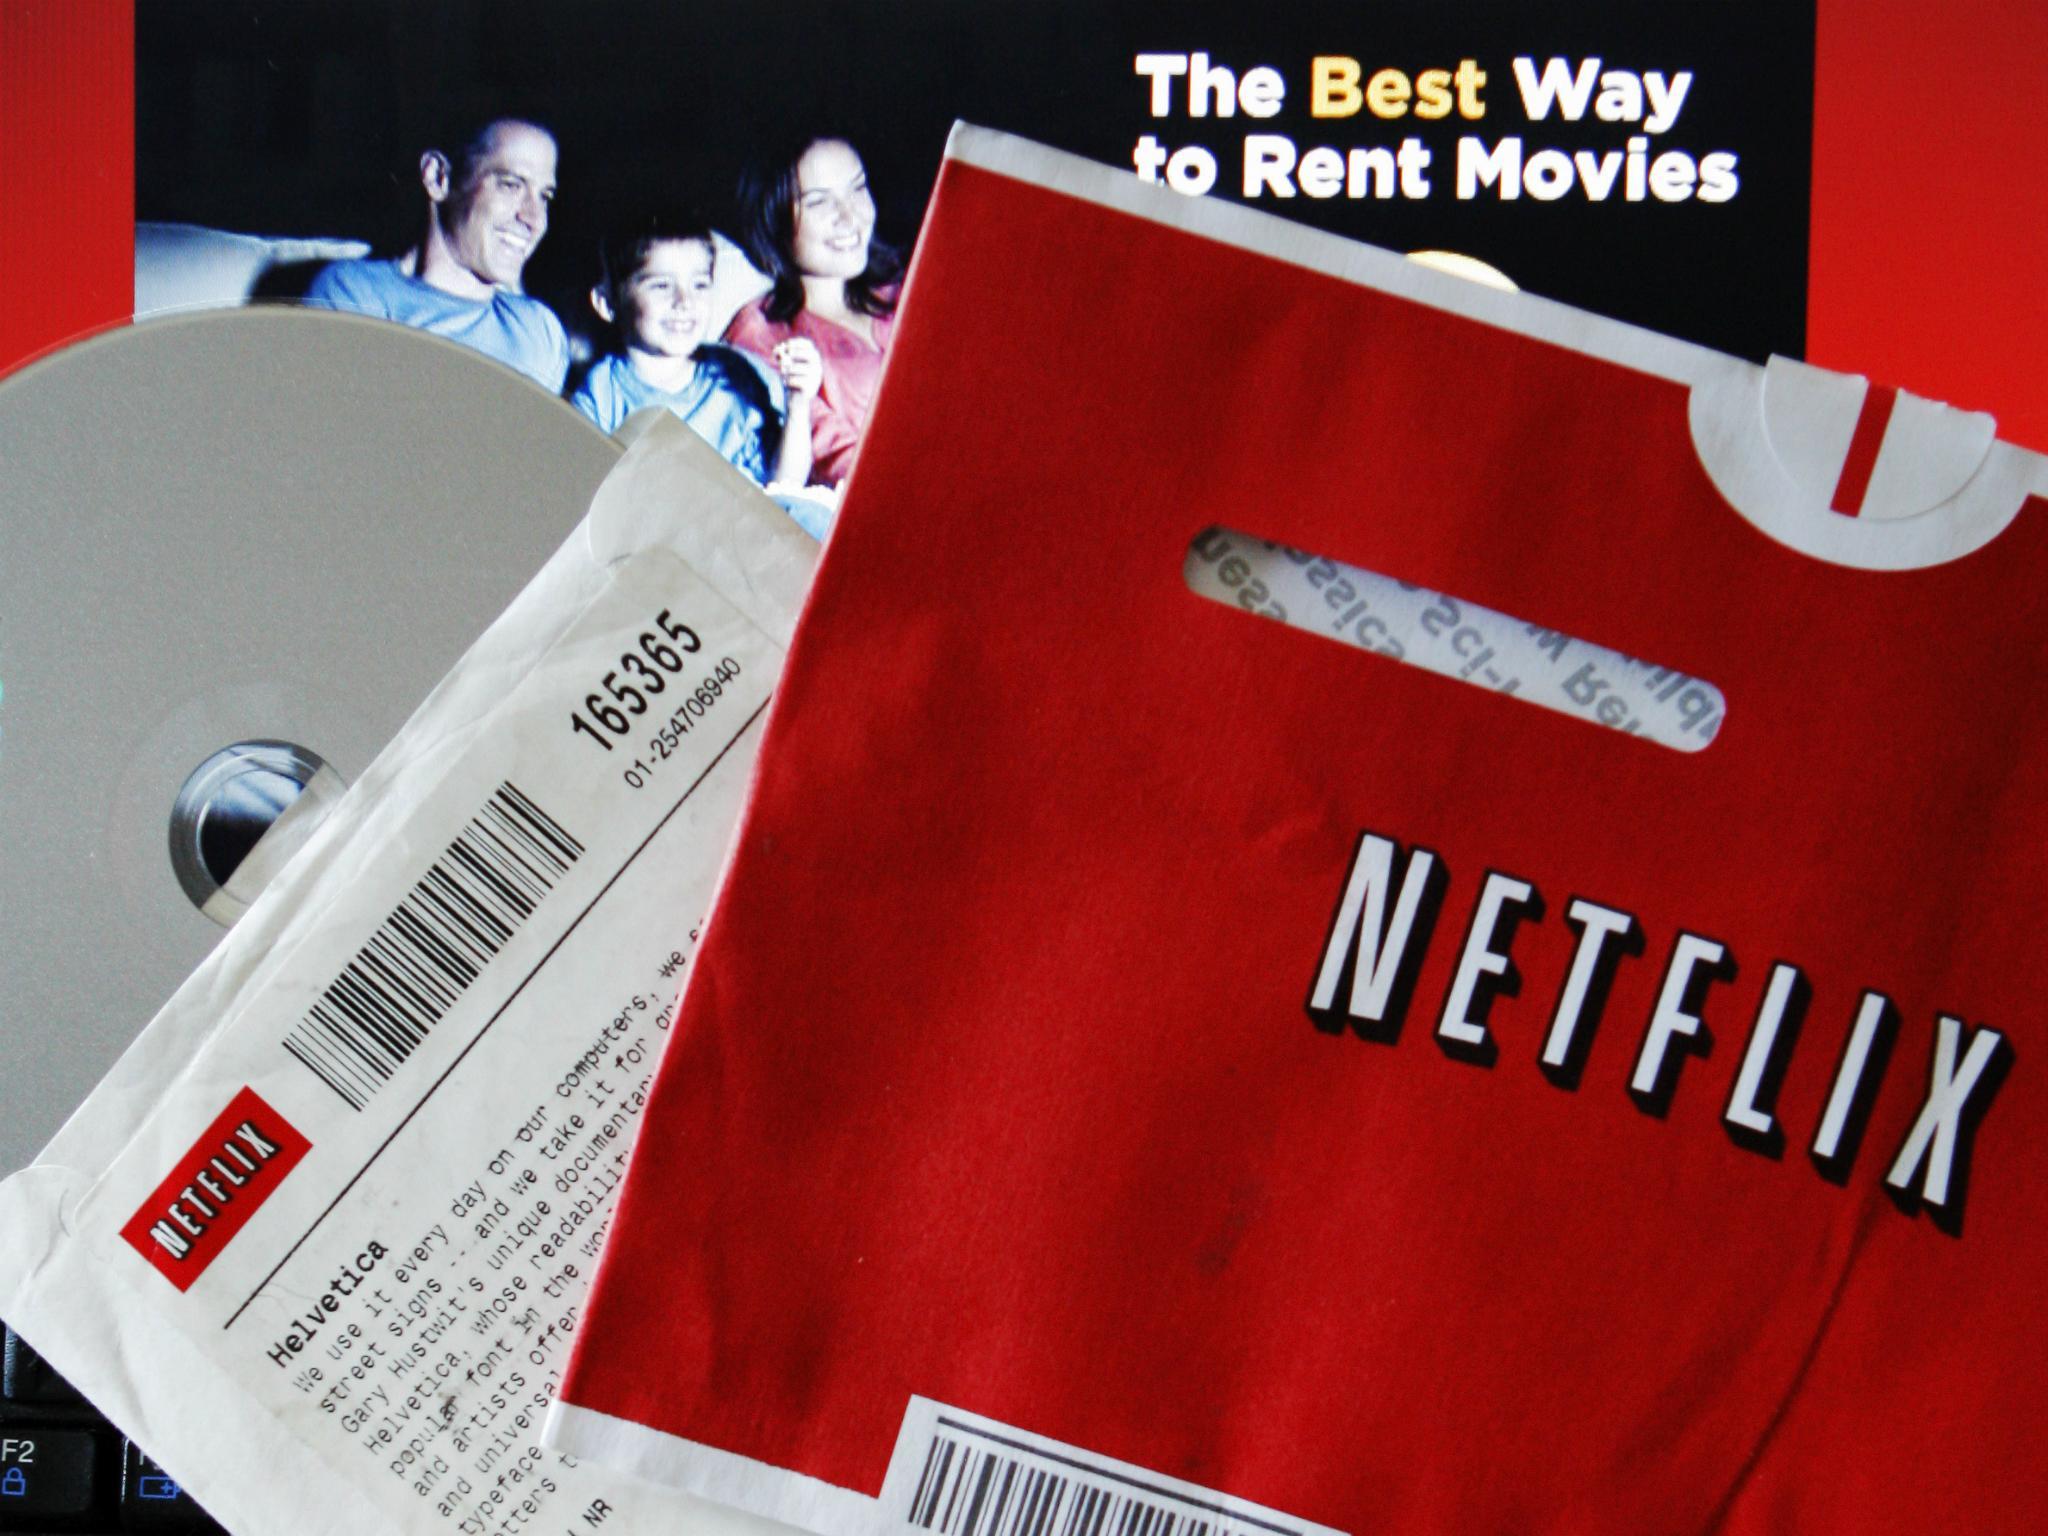 Netflix's new app lets you rent DVDs that will arrive in the post The